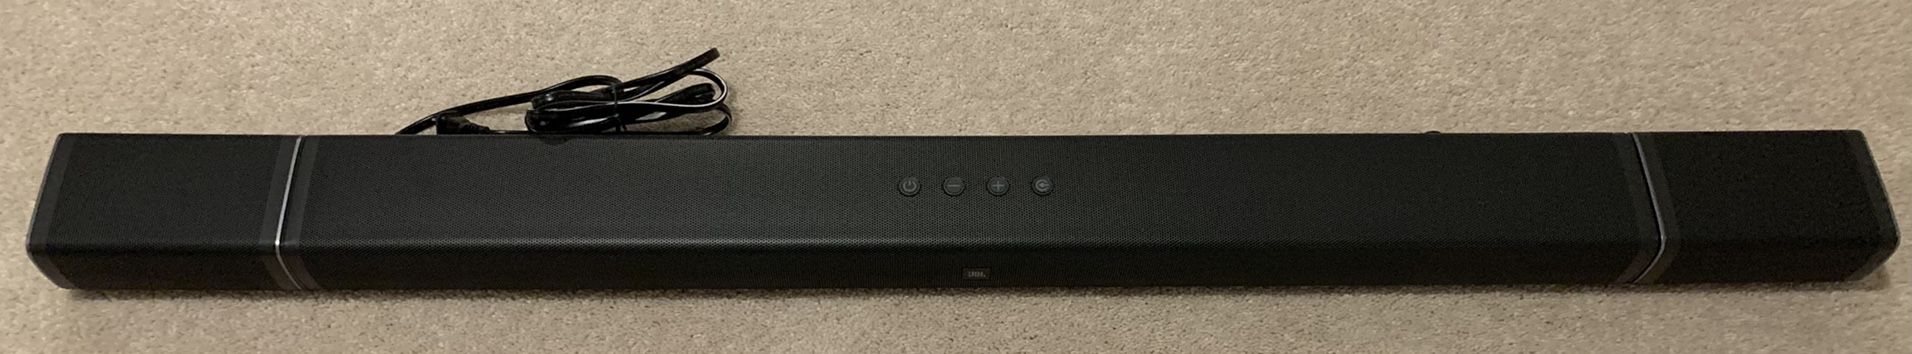 JBL 5.1 Sound Bar With Wireless Surrounds